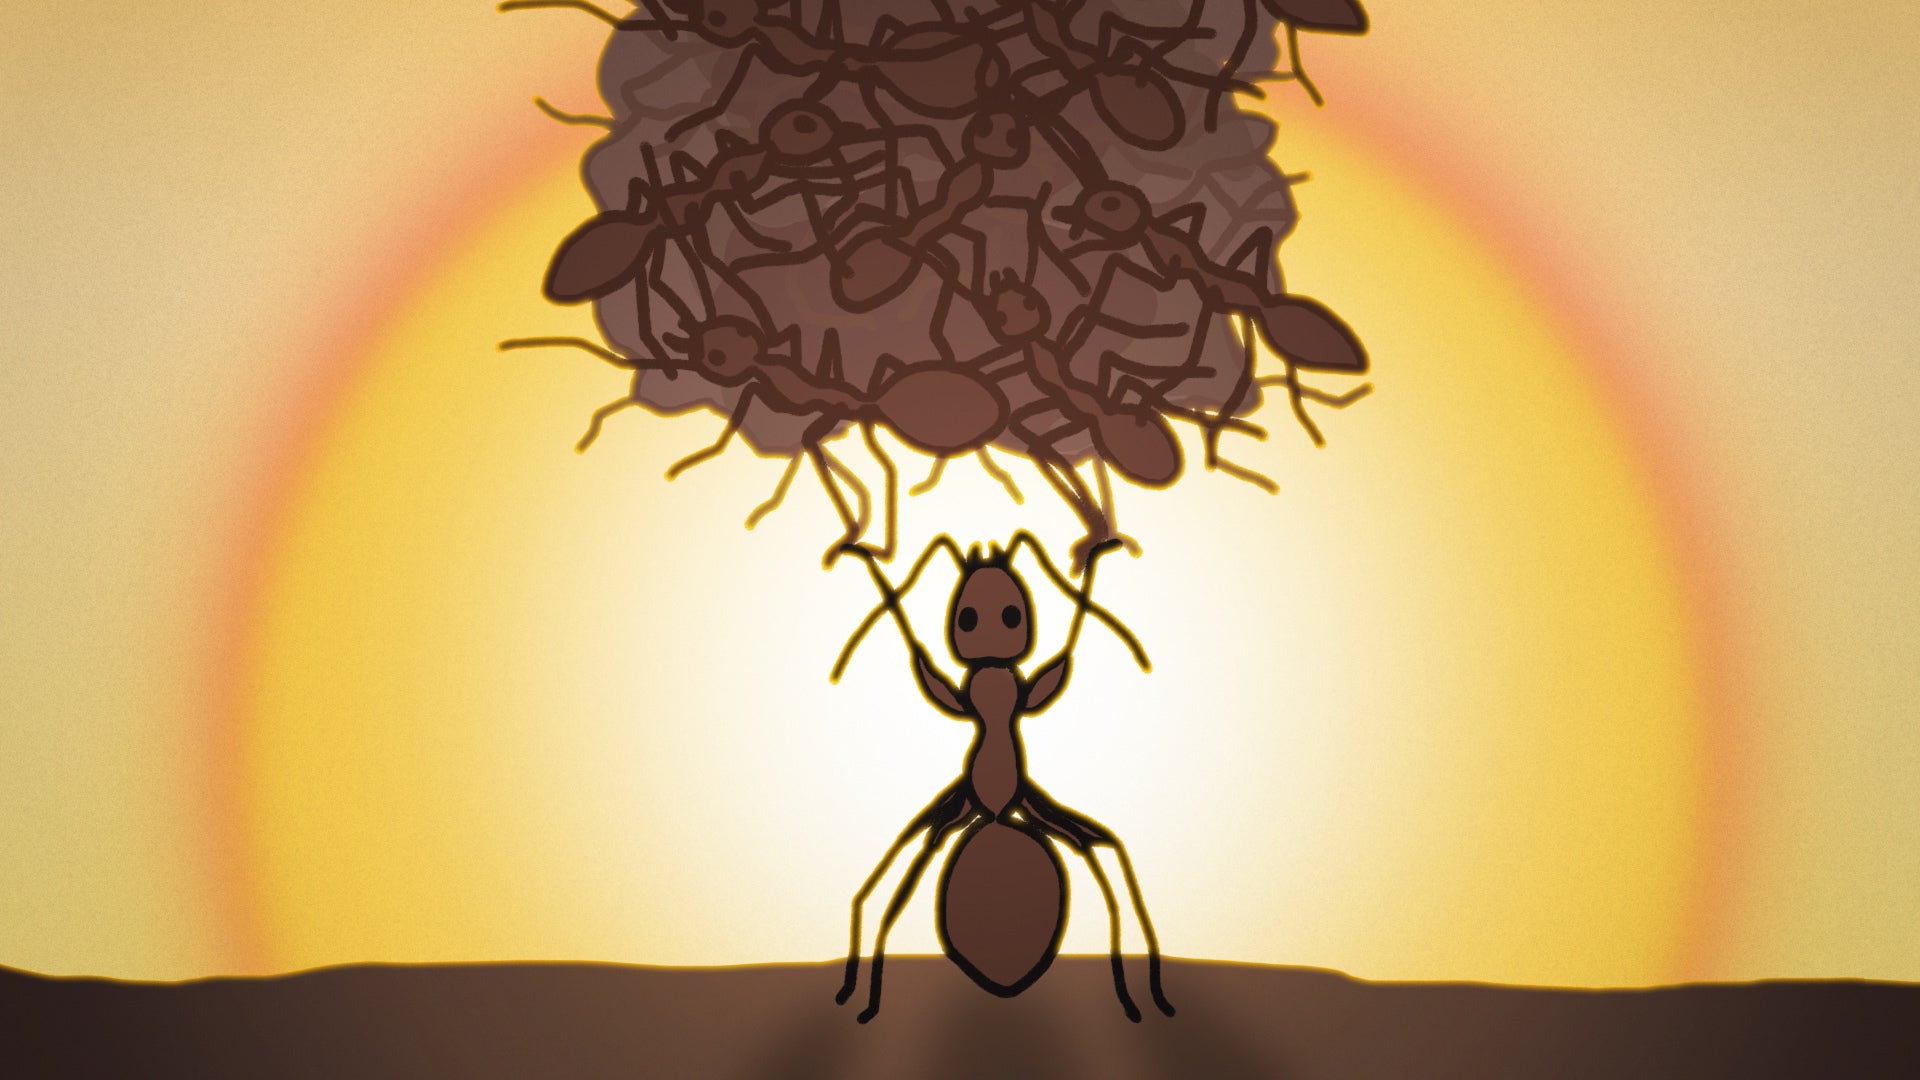 Illustration of an ant holding up other ants.